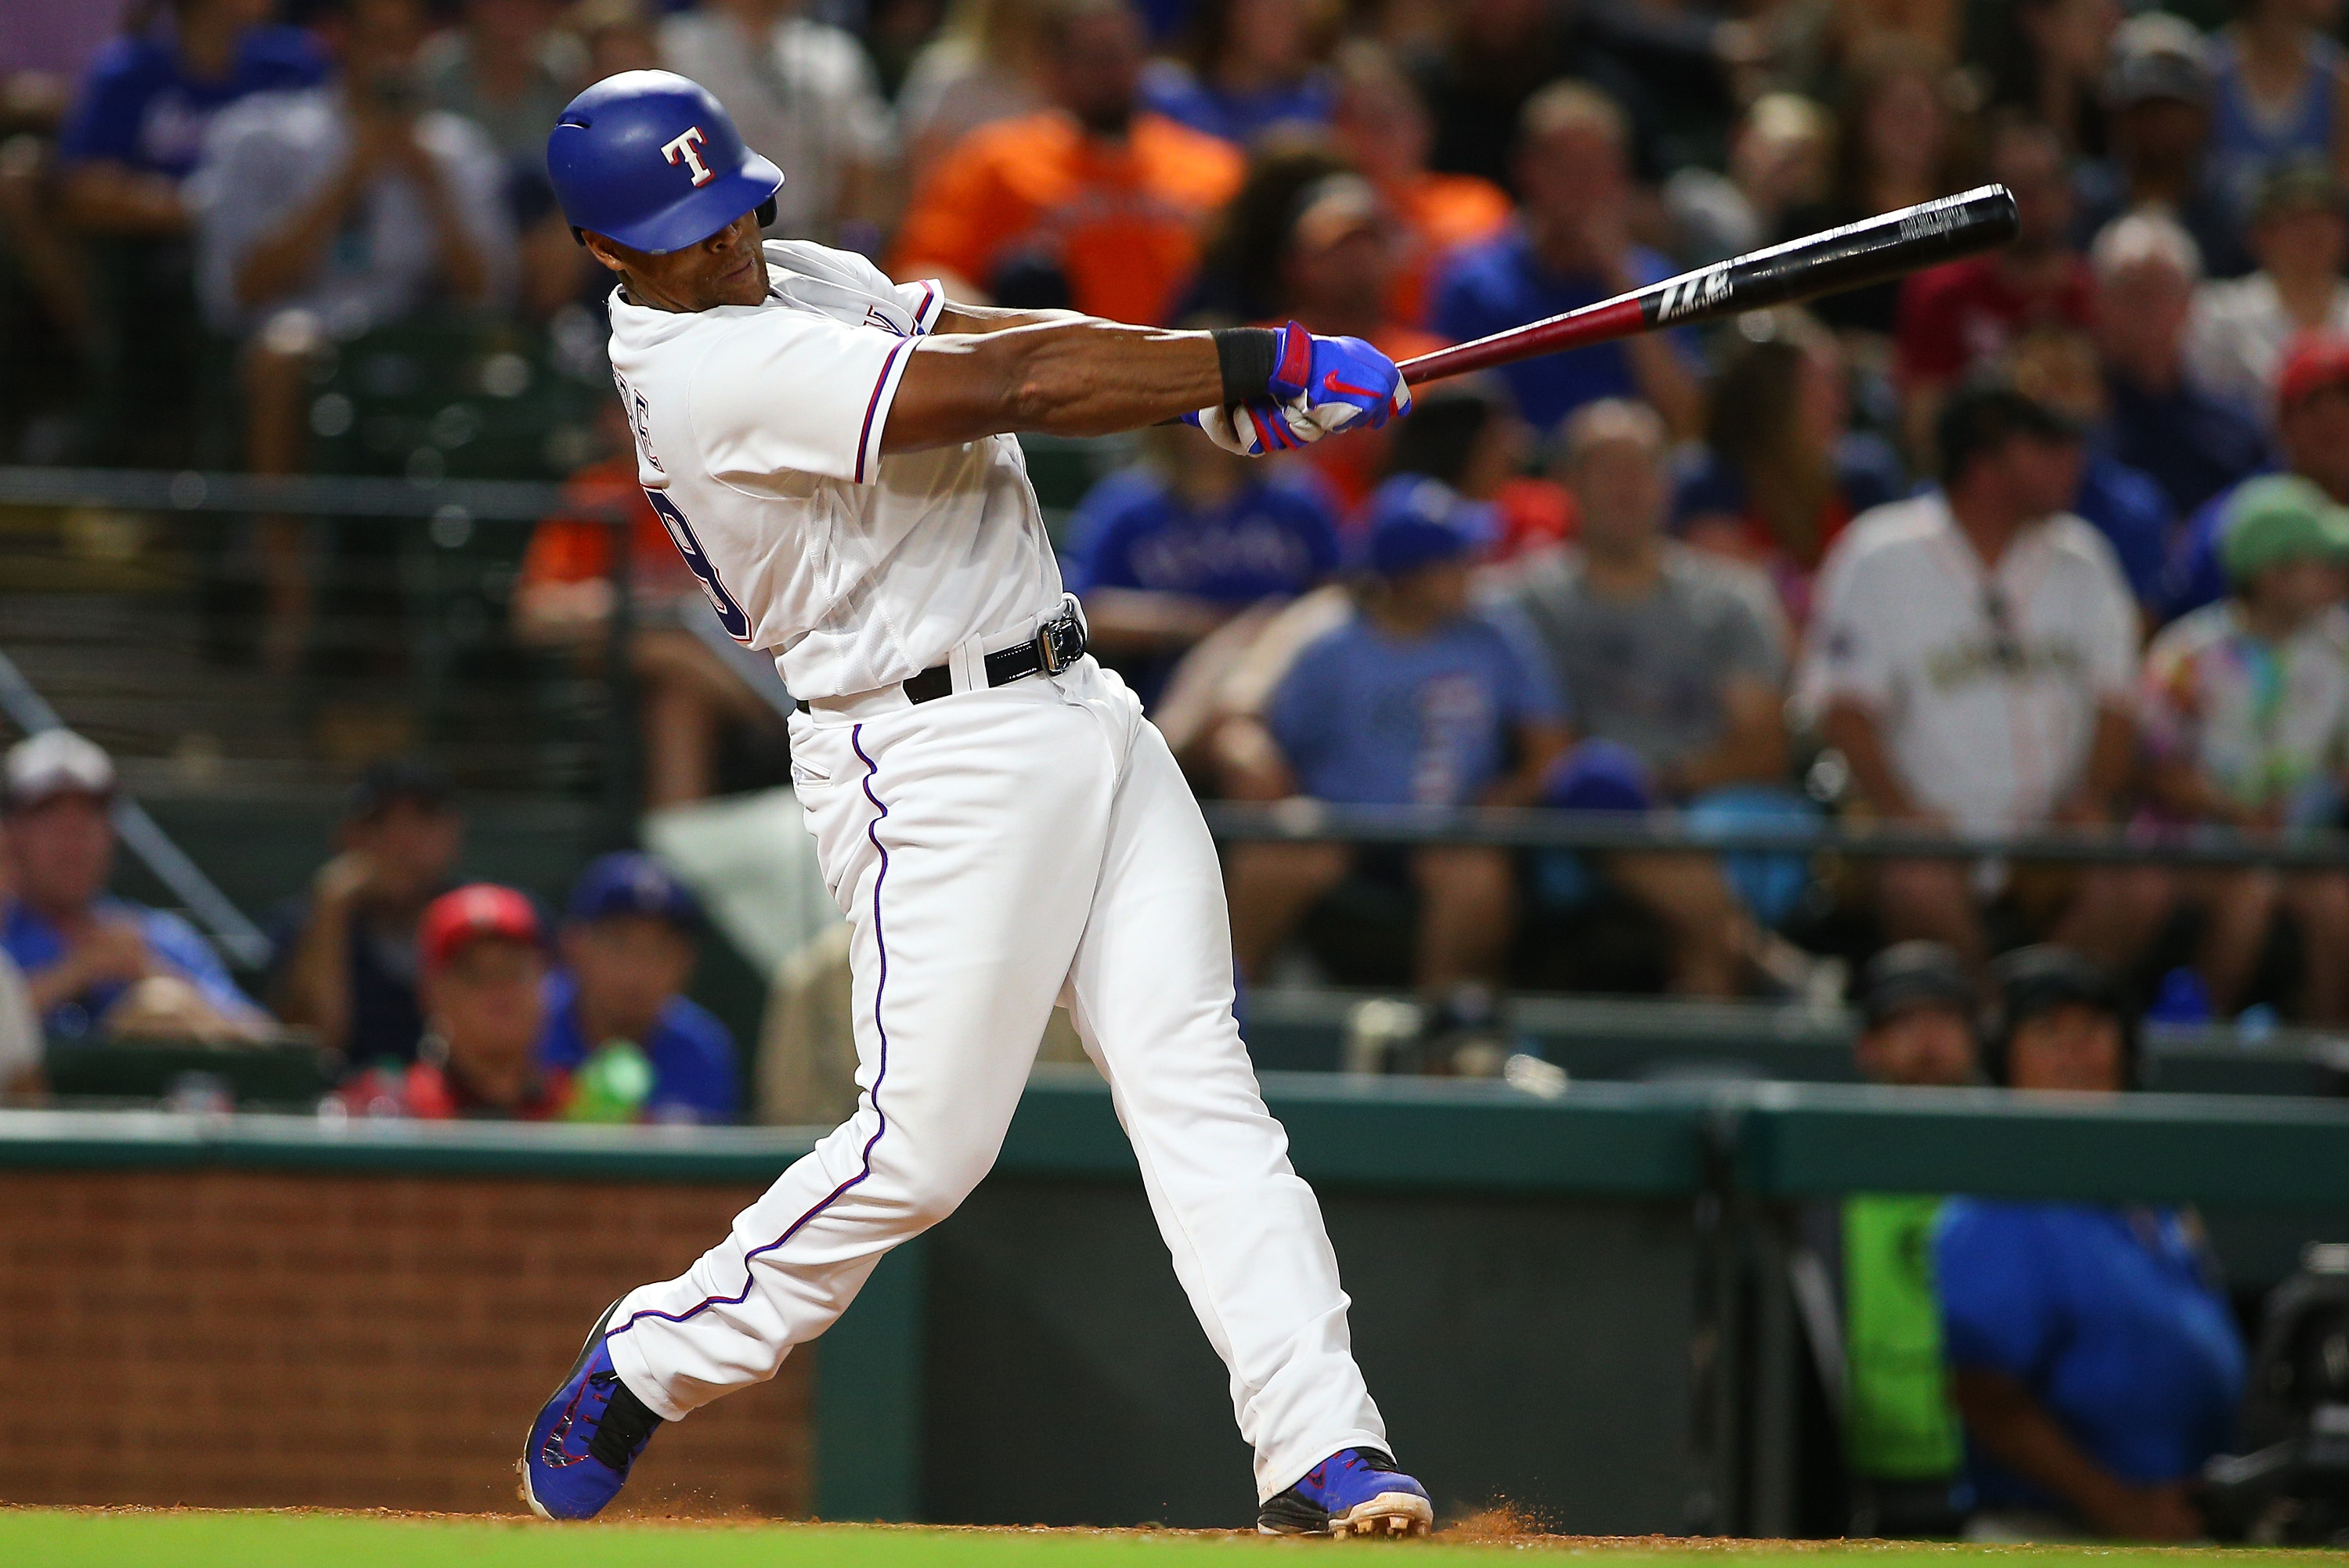 It's different: Rangers adjust to clubhouse without Adrian Beltre